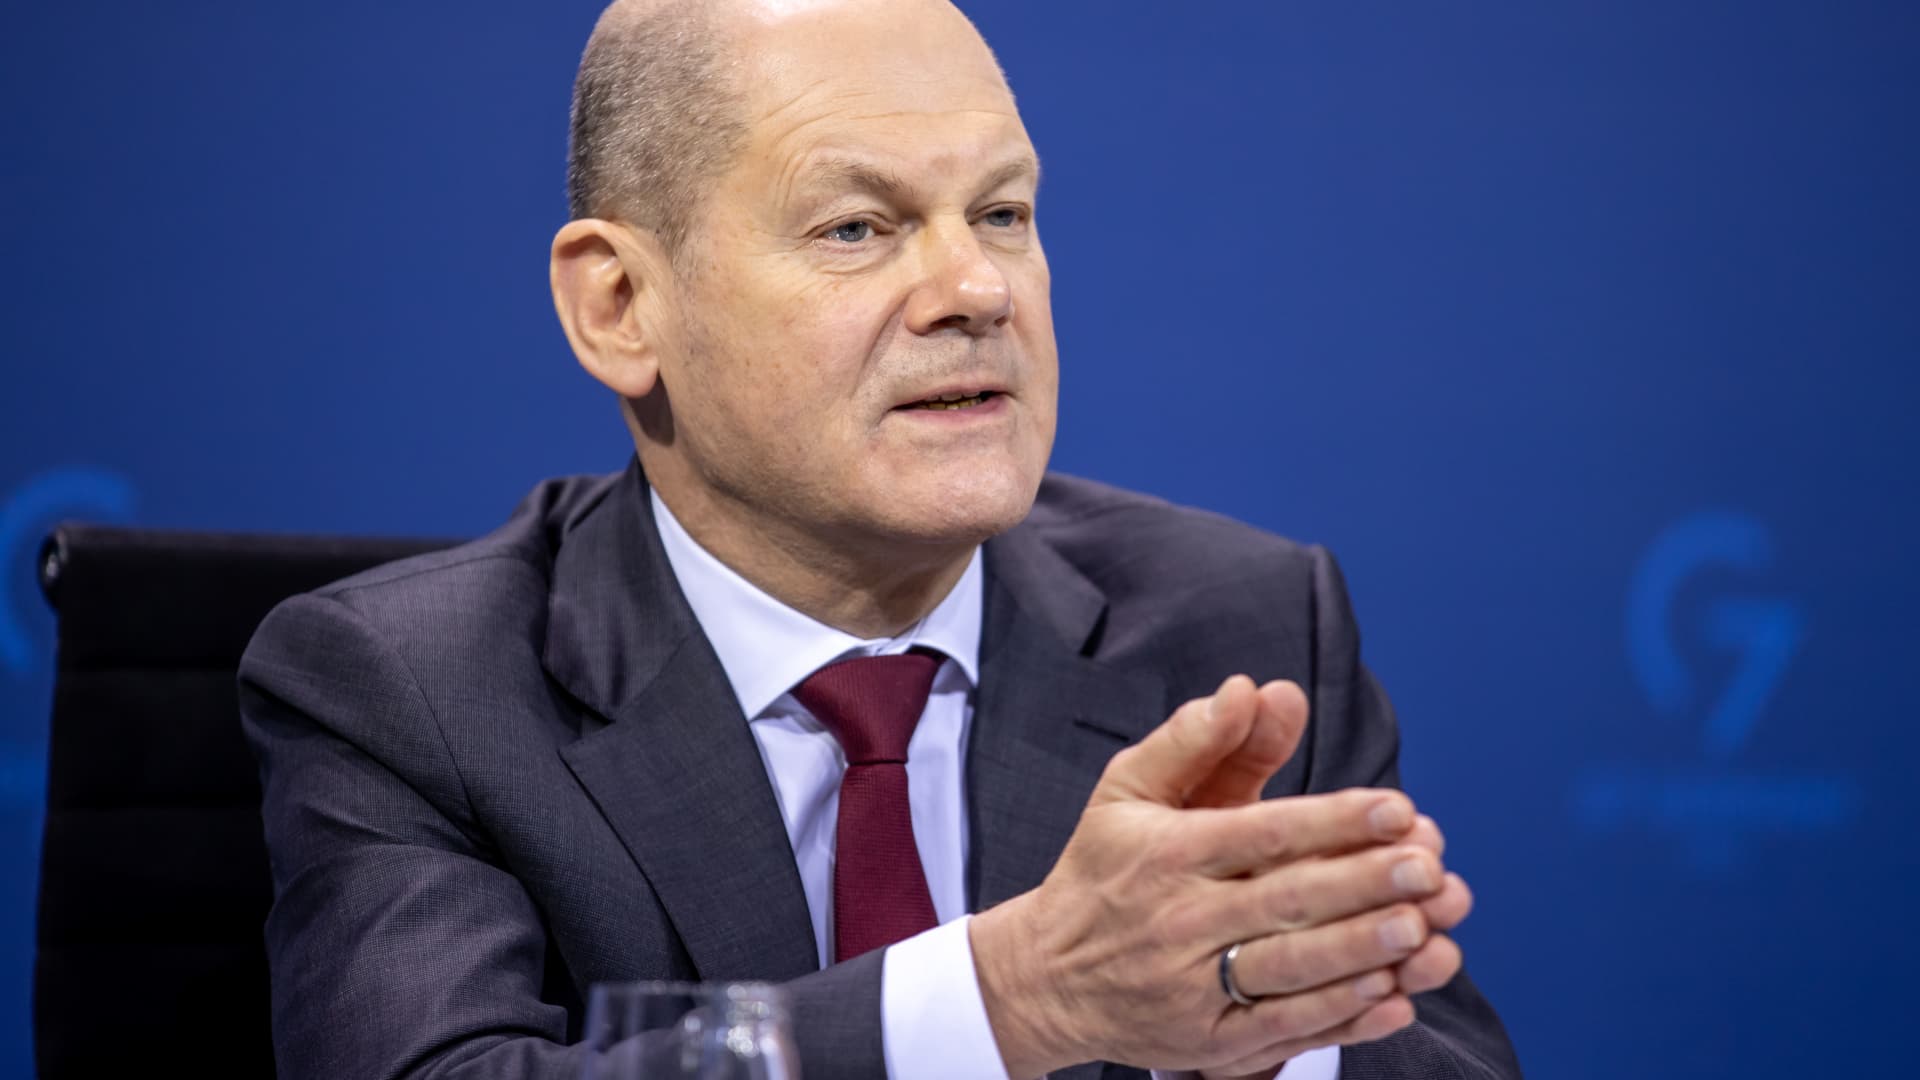 German Chancellor Olaf Scholz attends a press conference following a meeting of federal and state government leaders on February 16, 2022 in Berlin, Germany.